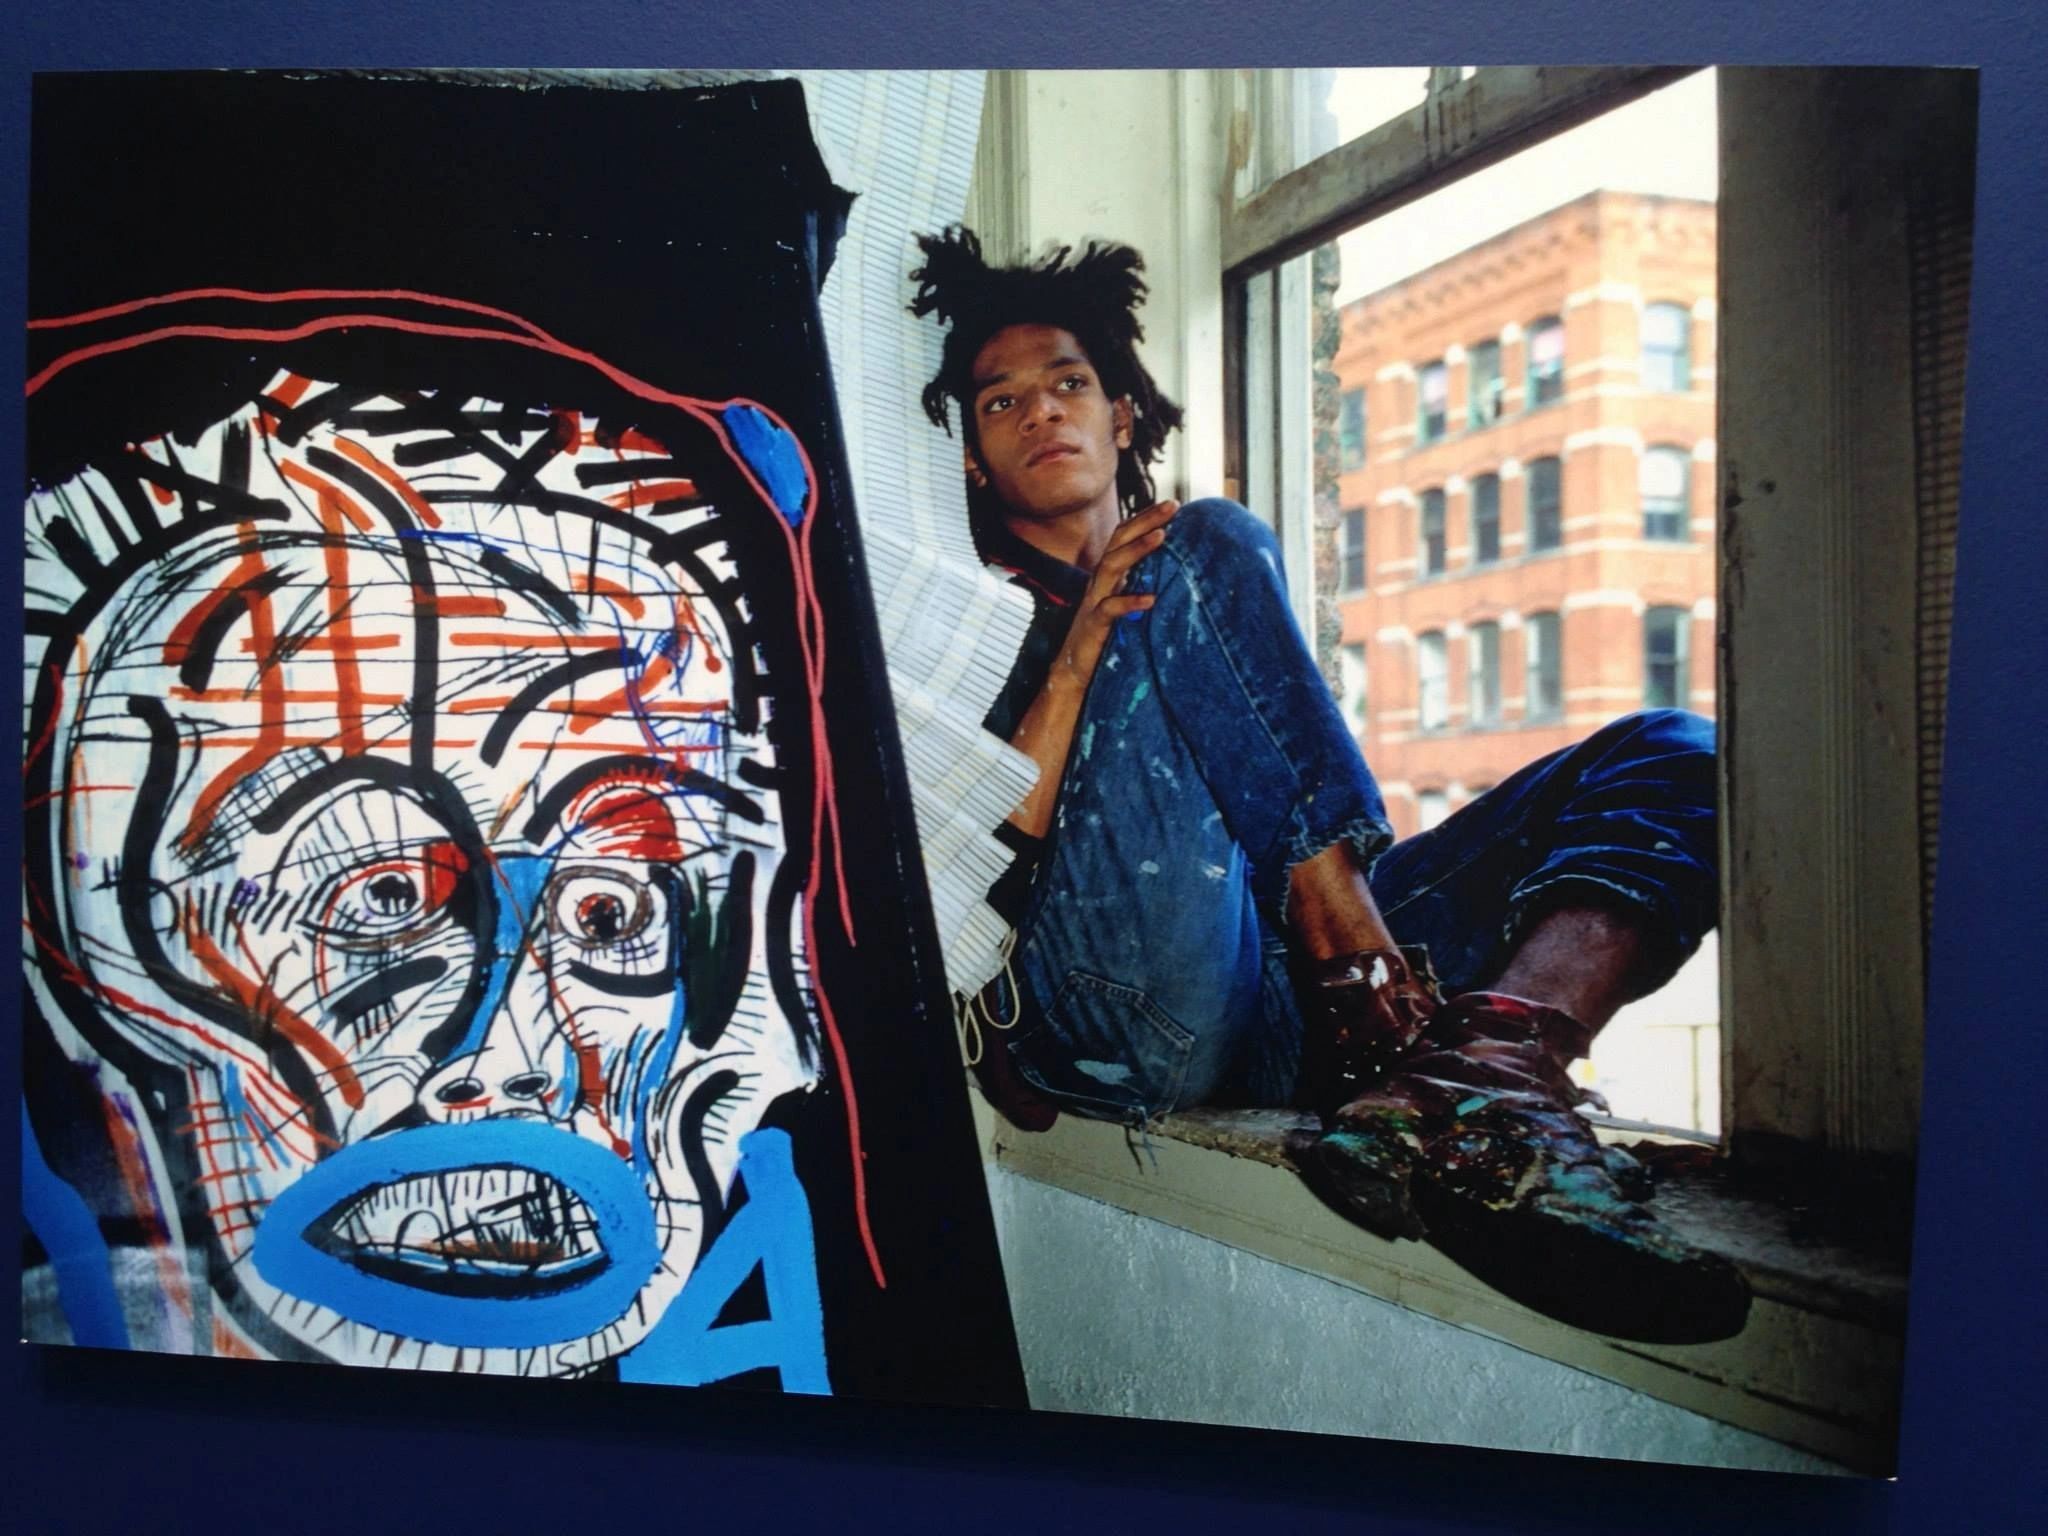 Warhol wanted Robert Mapplethorpe'—photographer of famous boxing shoot with  Jean-Michel Basquiat on how it came to be